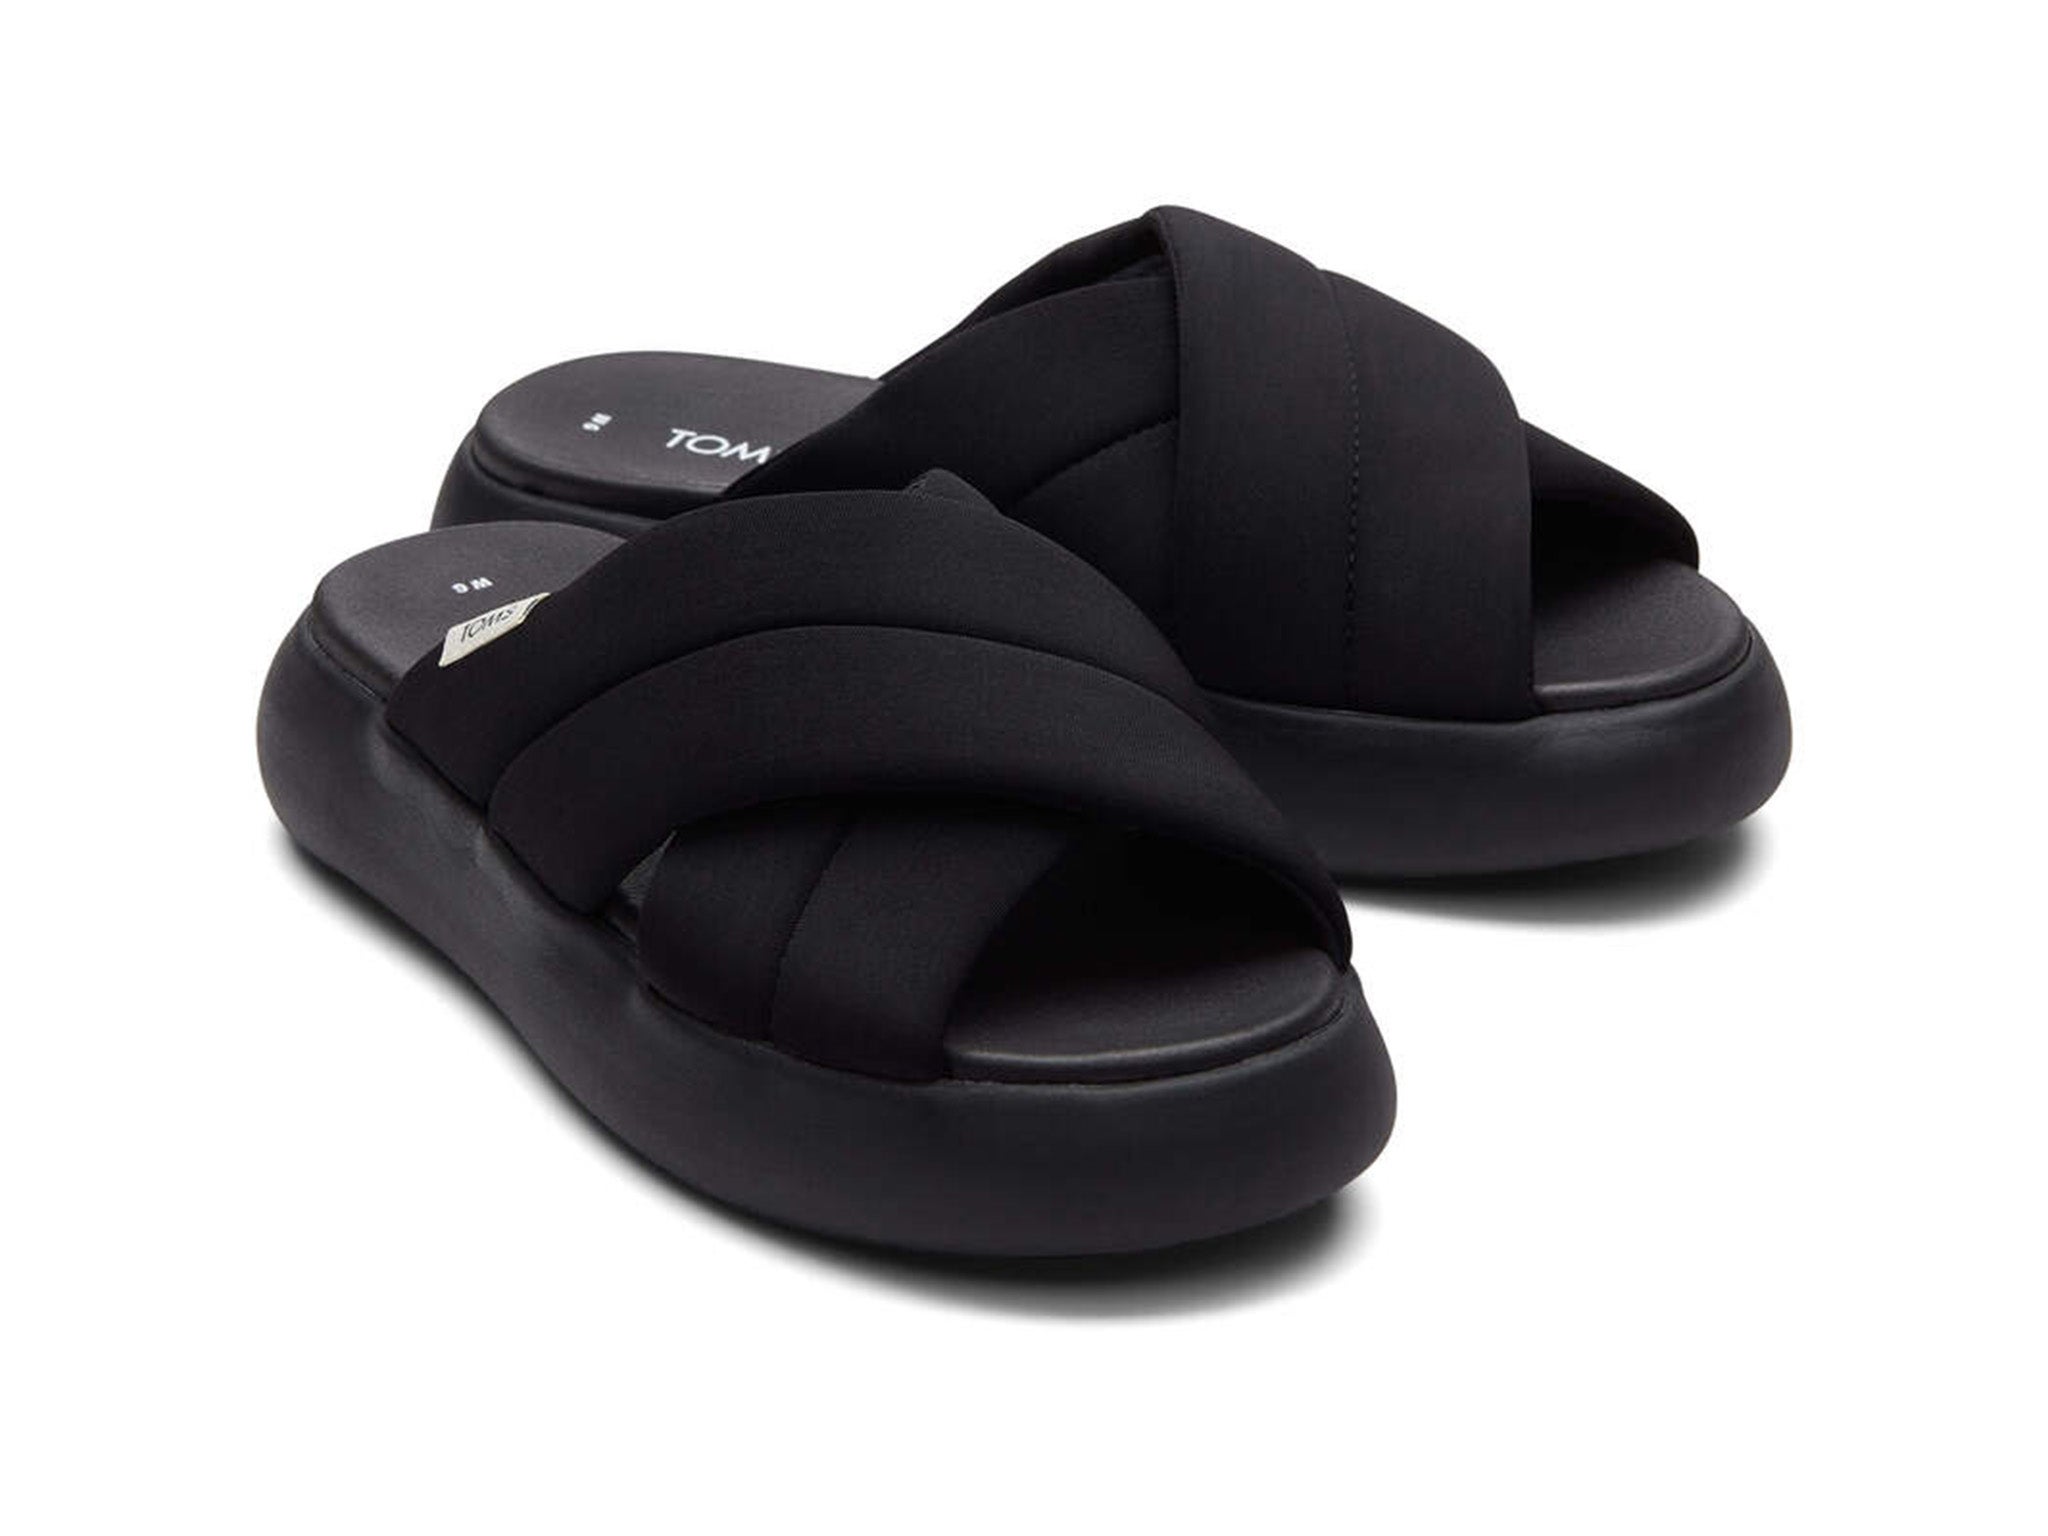 Best vegan sandals for women 2022: Slides, mules and sandals | The ...